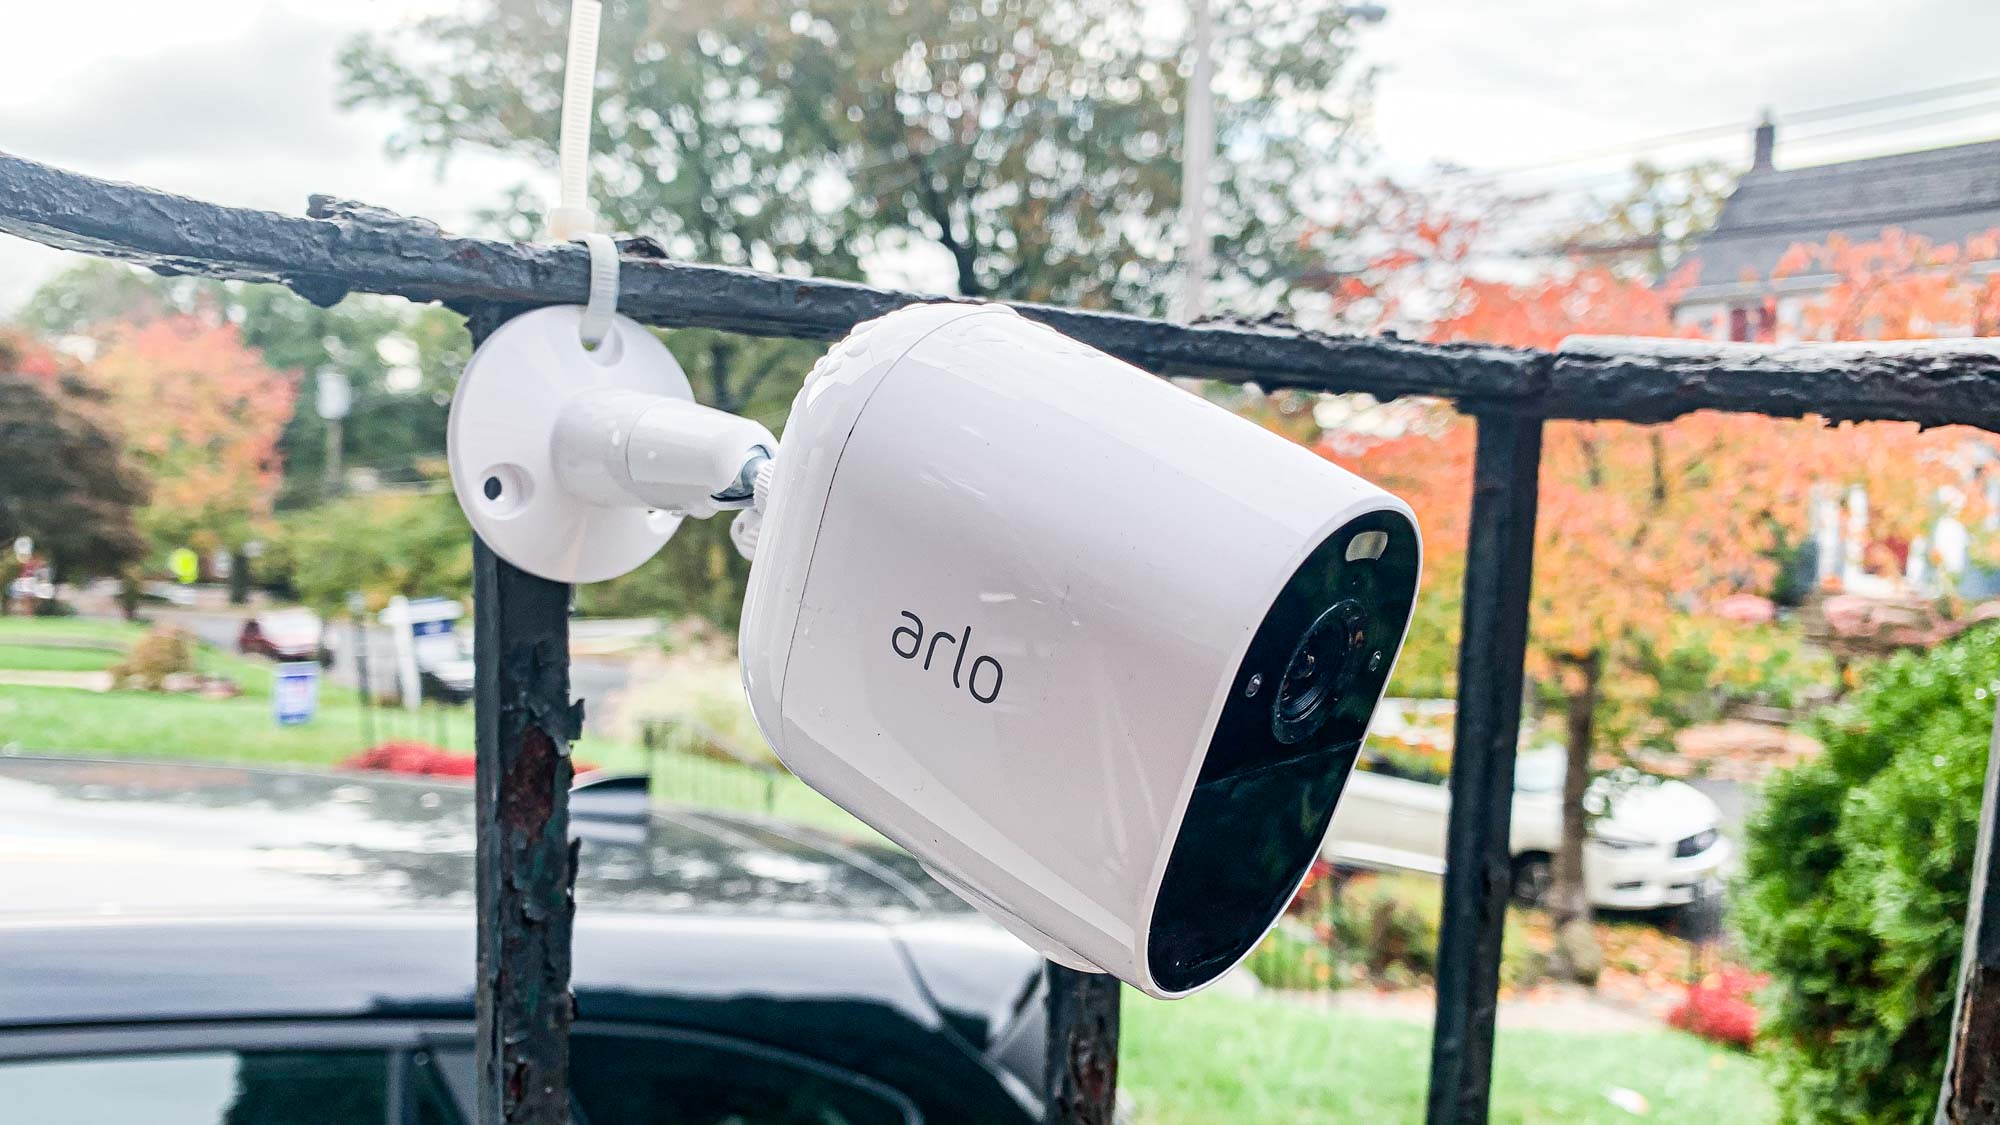 Stick out Fore type Mouthpiece Arlo Essential Wireless Security Camera review | Tom's Guide